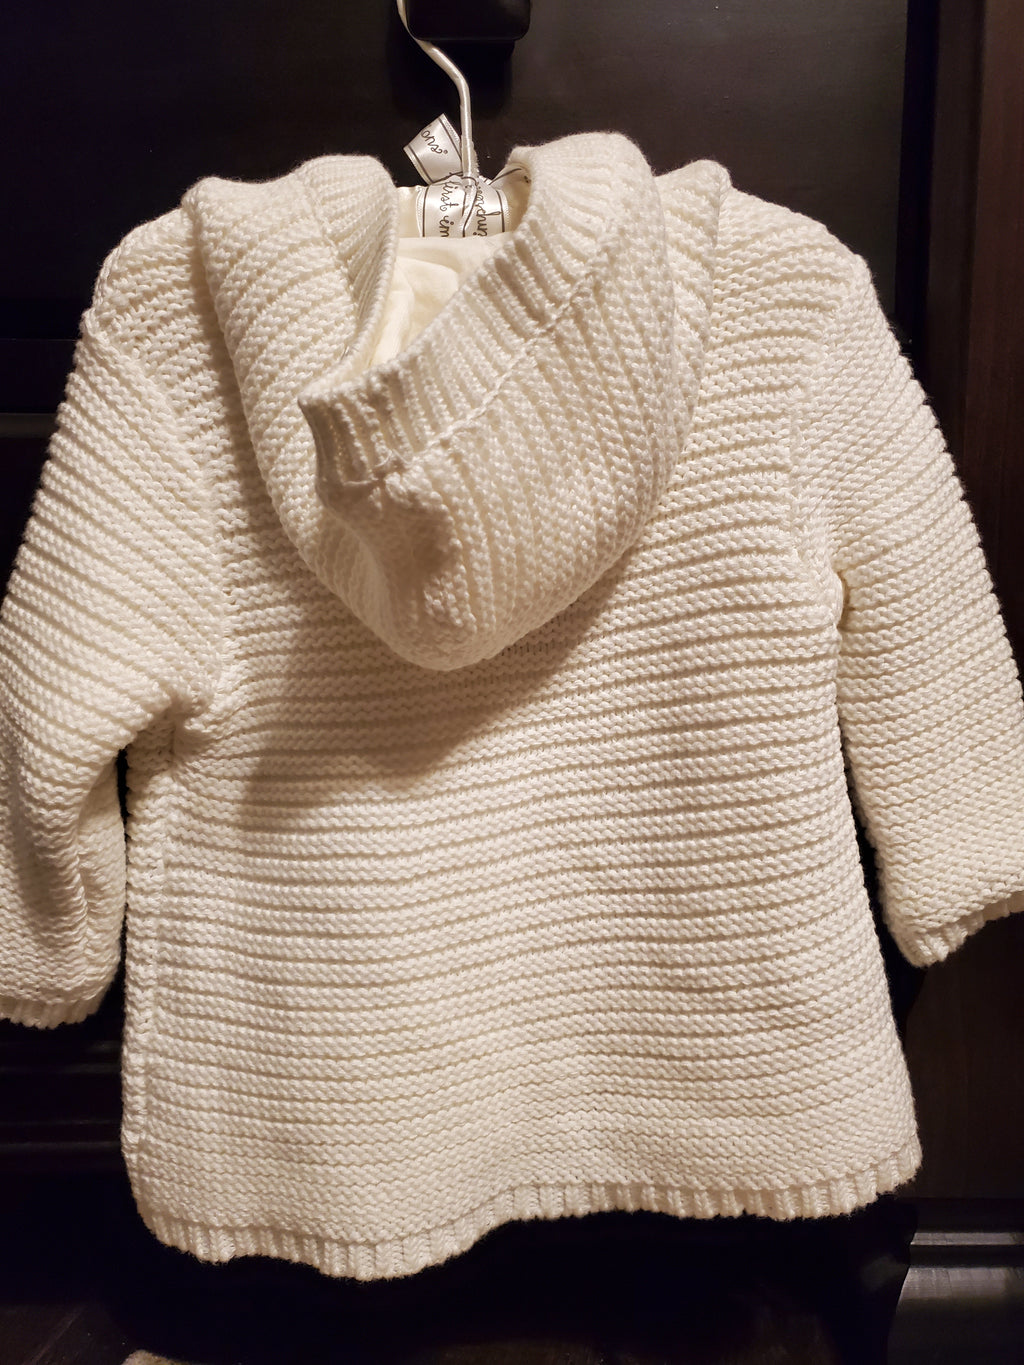 Crocheted Button Down Sweater Coat